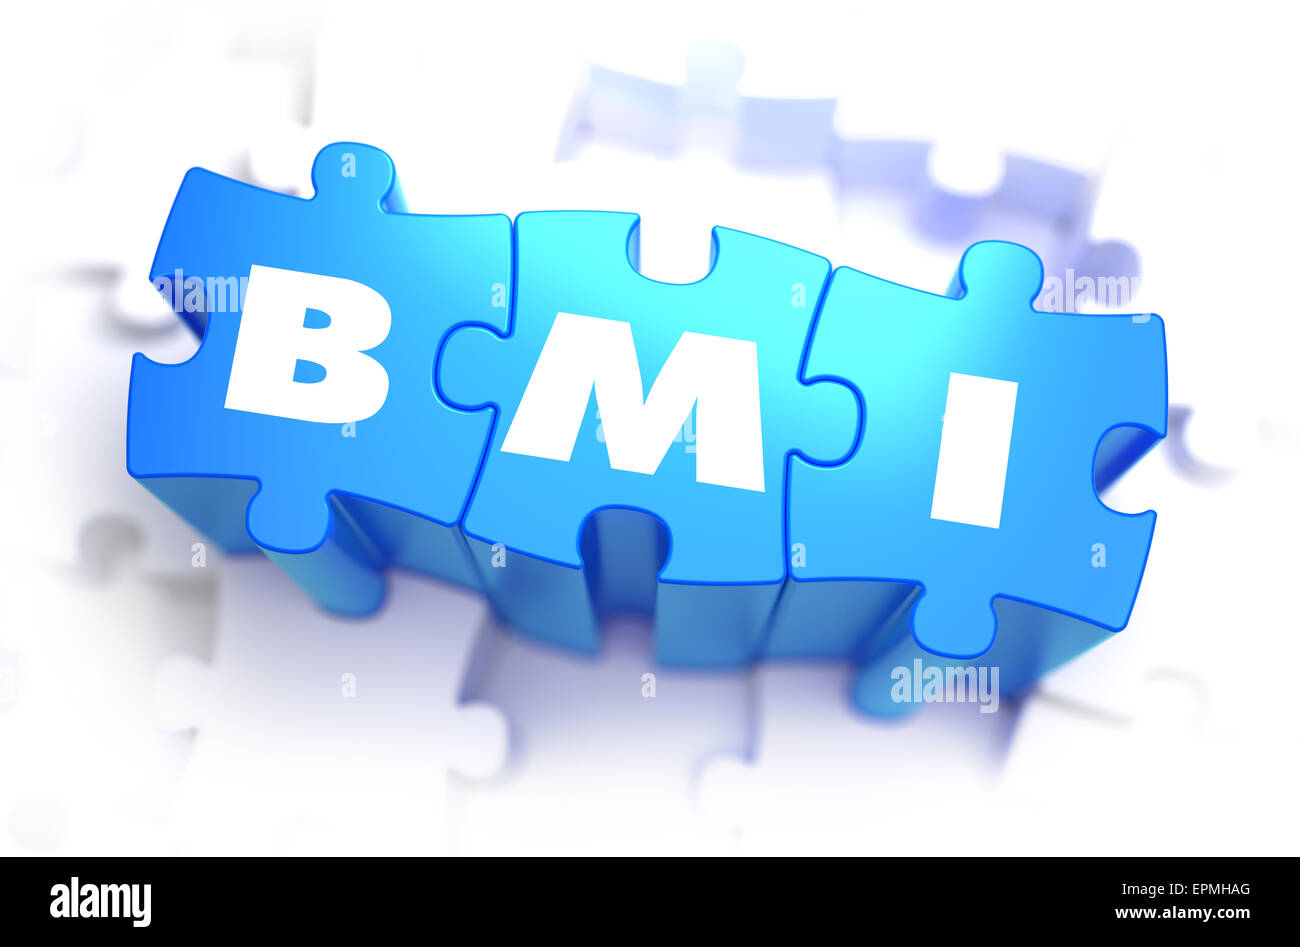 BMI - Body Mass Index - White Word on Blue Puzzles on White Background. 3D Illustration. Stock Photo